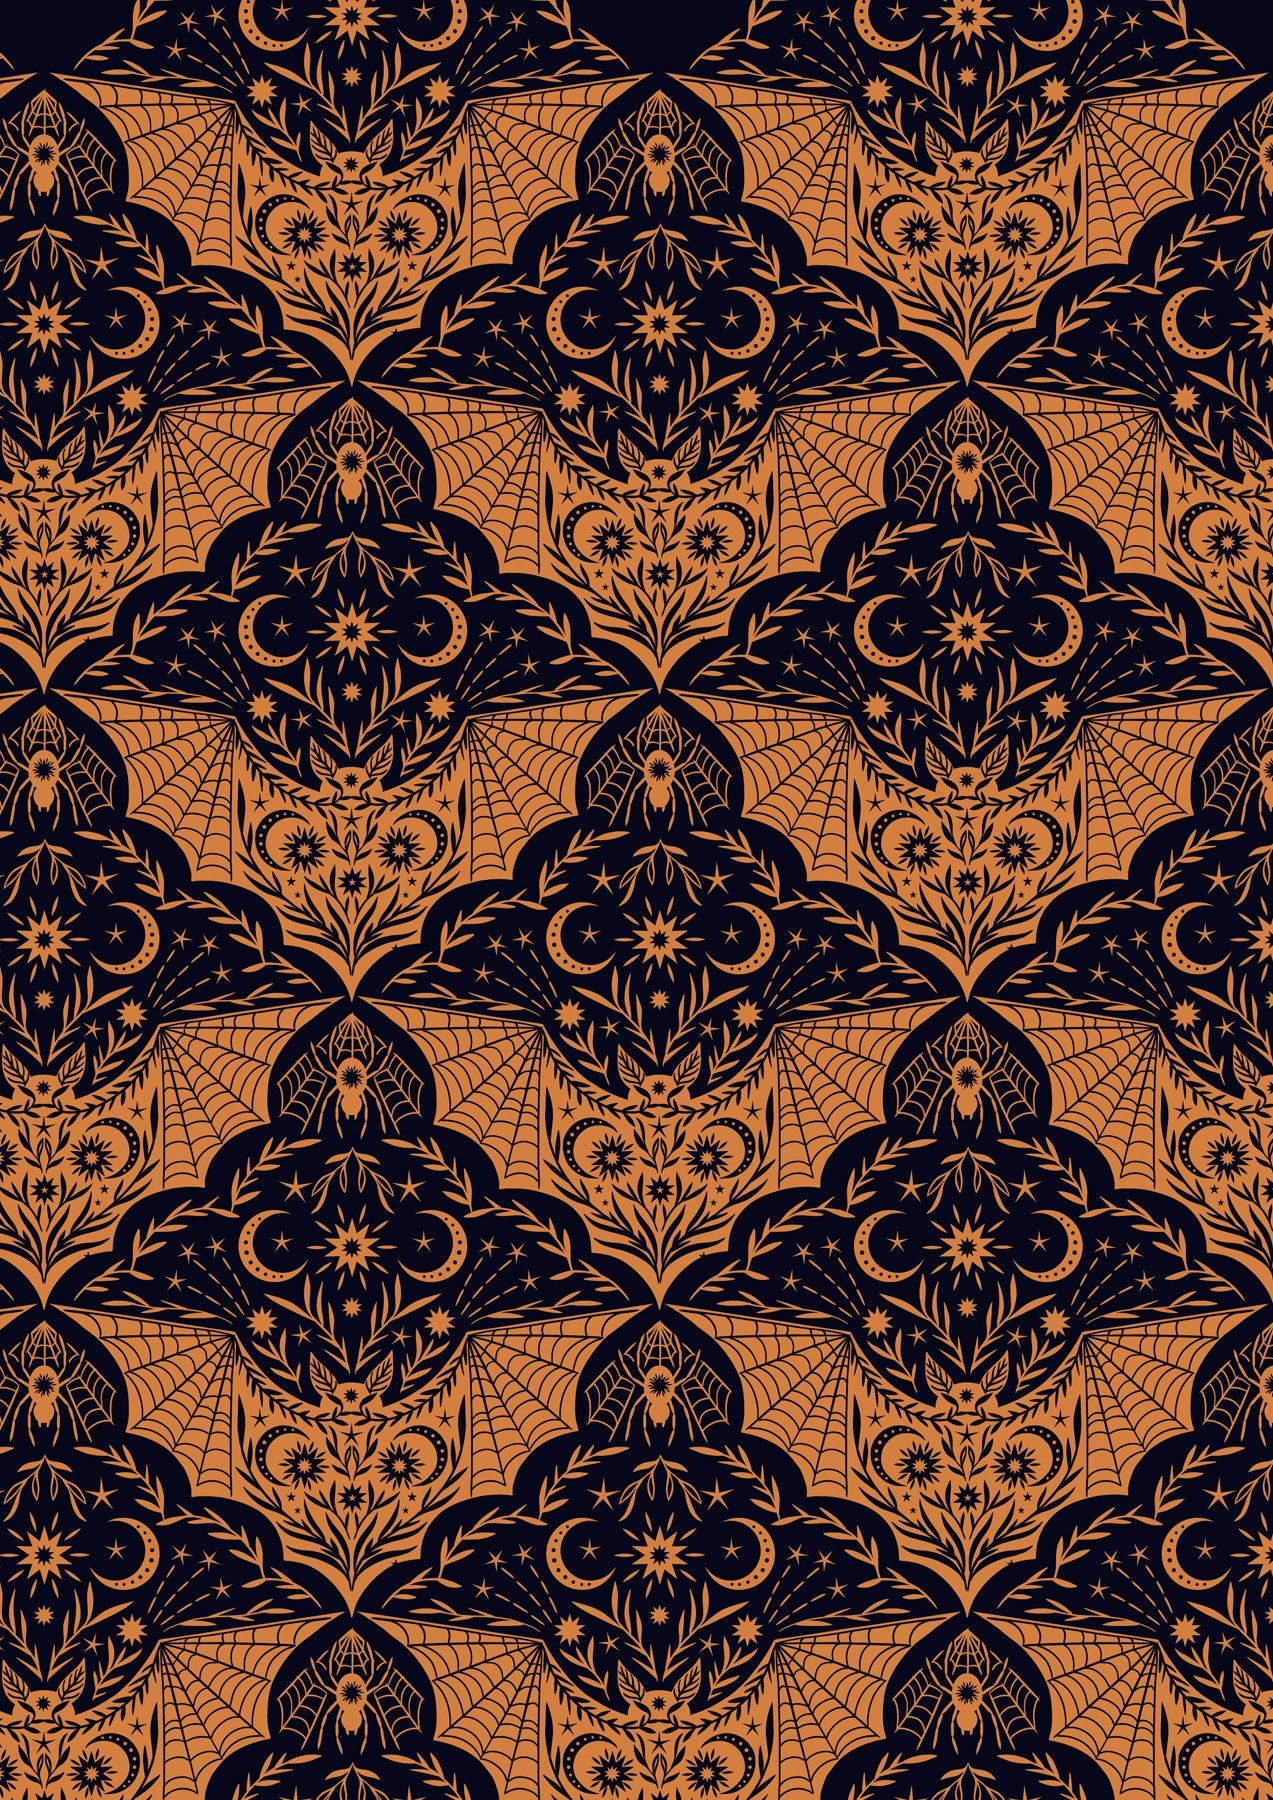 Cast A Spell, Orange Floral Bat, A720.1, Lewis & Irene Fabric, Quilt Fabric, Cotton Fabric, Halloween Fabric, Fabric By the Yard